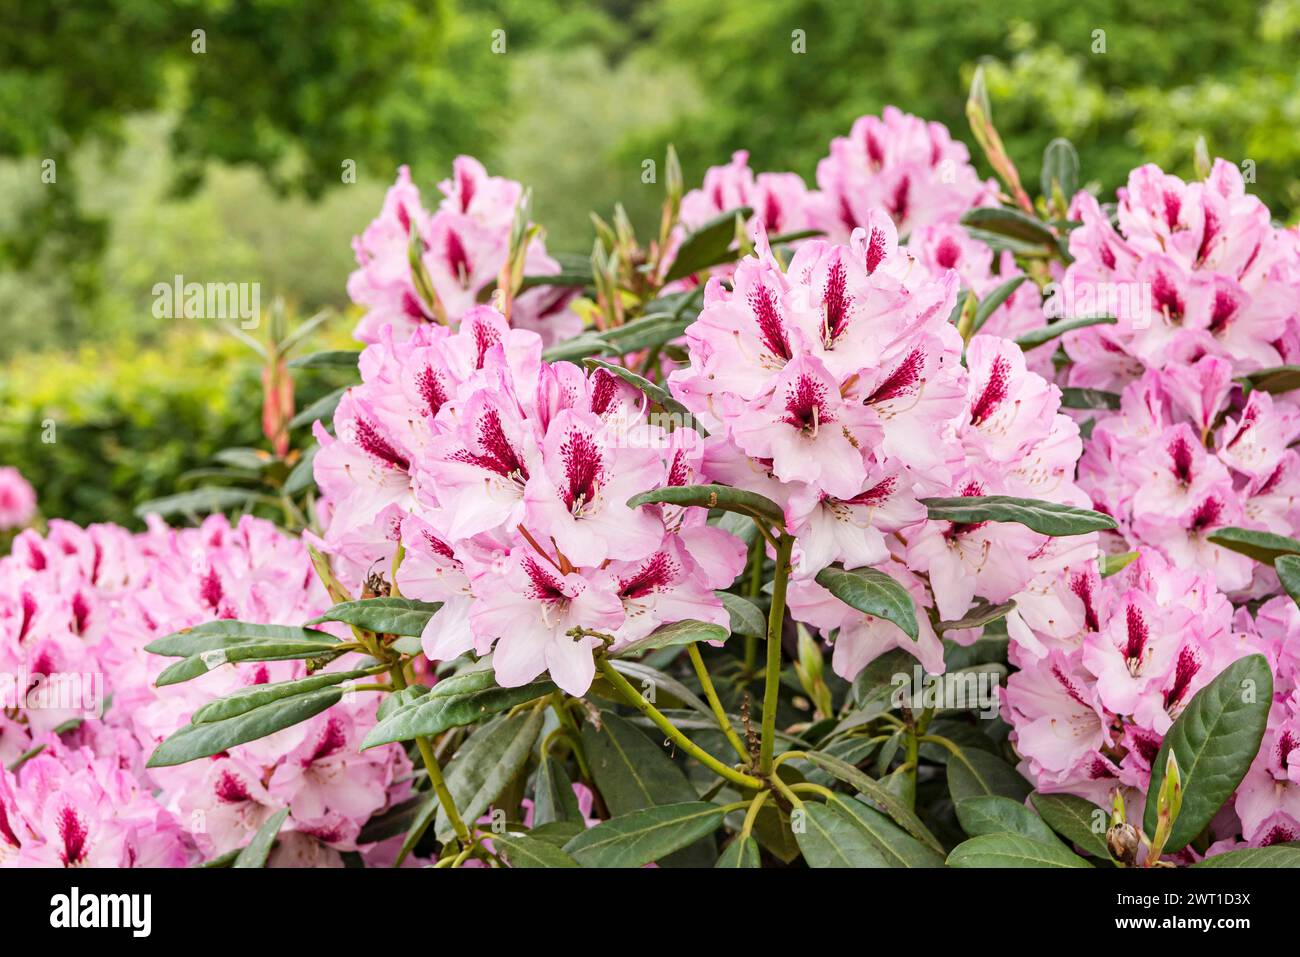 rhododendron (Rhododendron 'Herbstfreude', Rhododendron Herbstfreude), fioritura, cultivar Herbstfreude Foto Stock